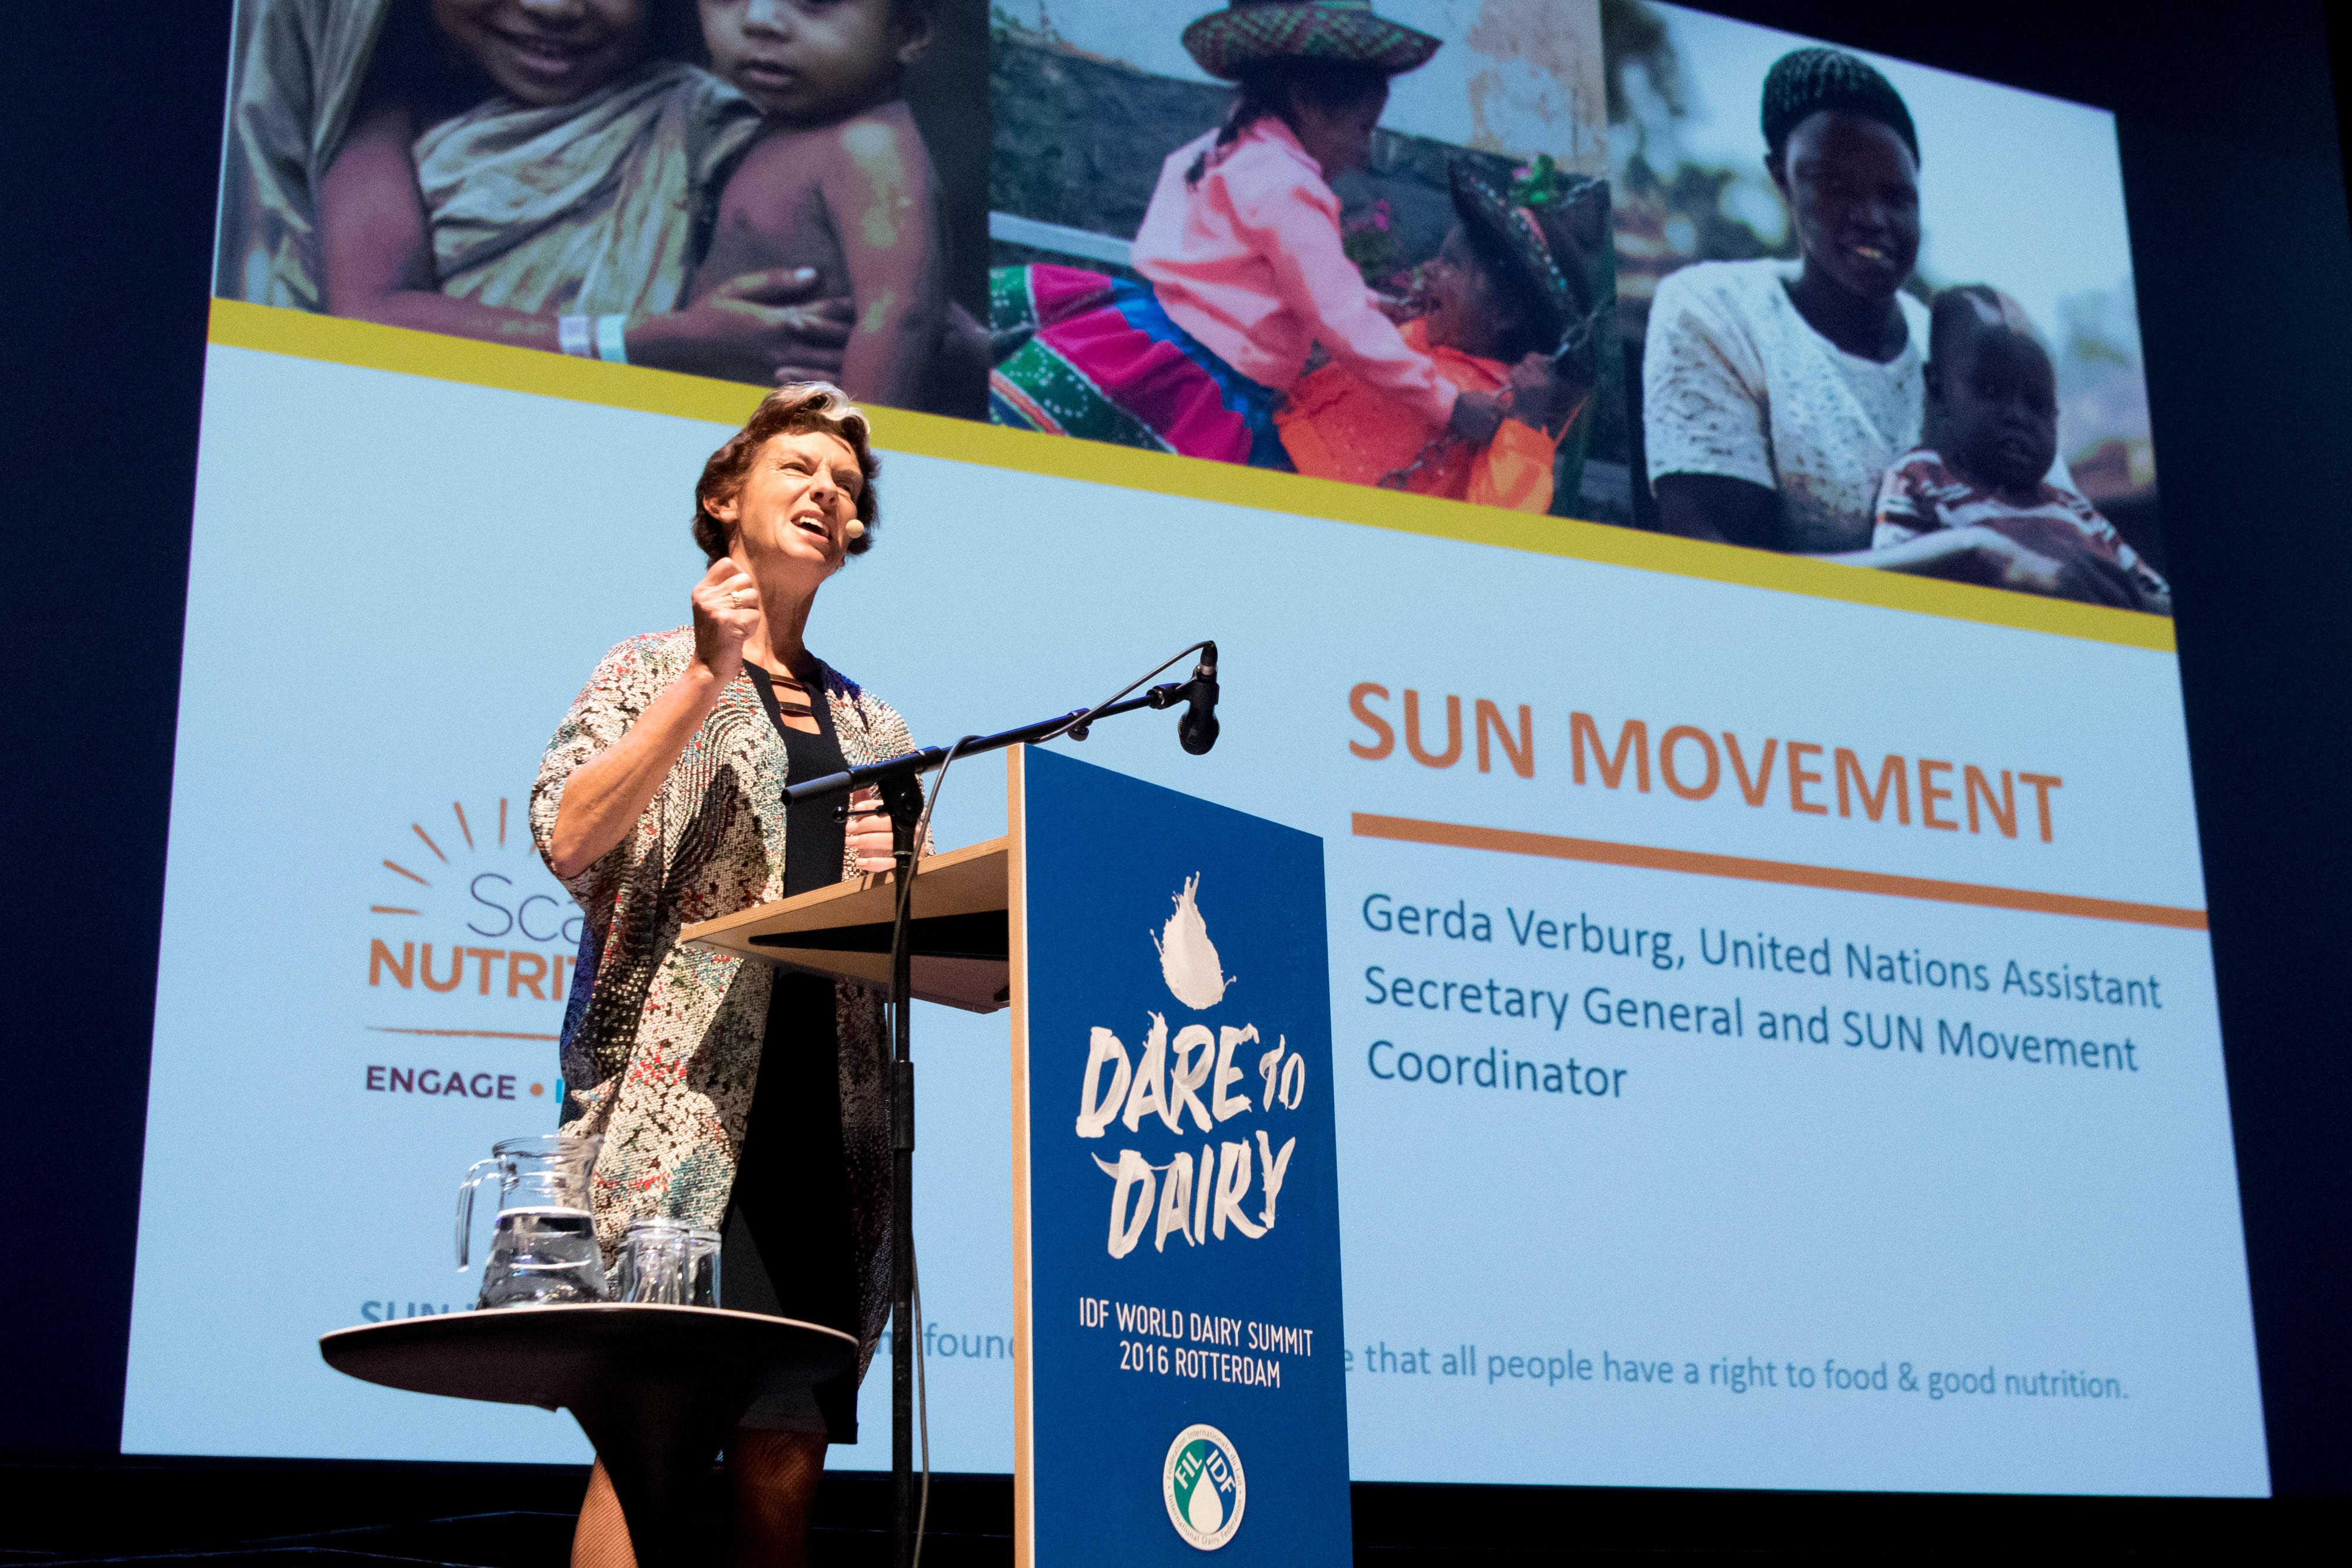 2016 World Dairy Summit highlights the need for nutritious, safe and sustainable dairy products